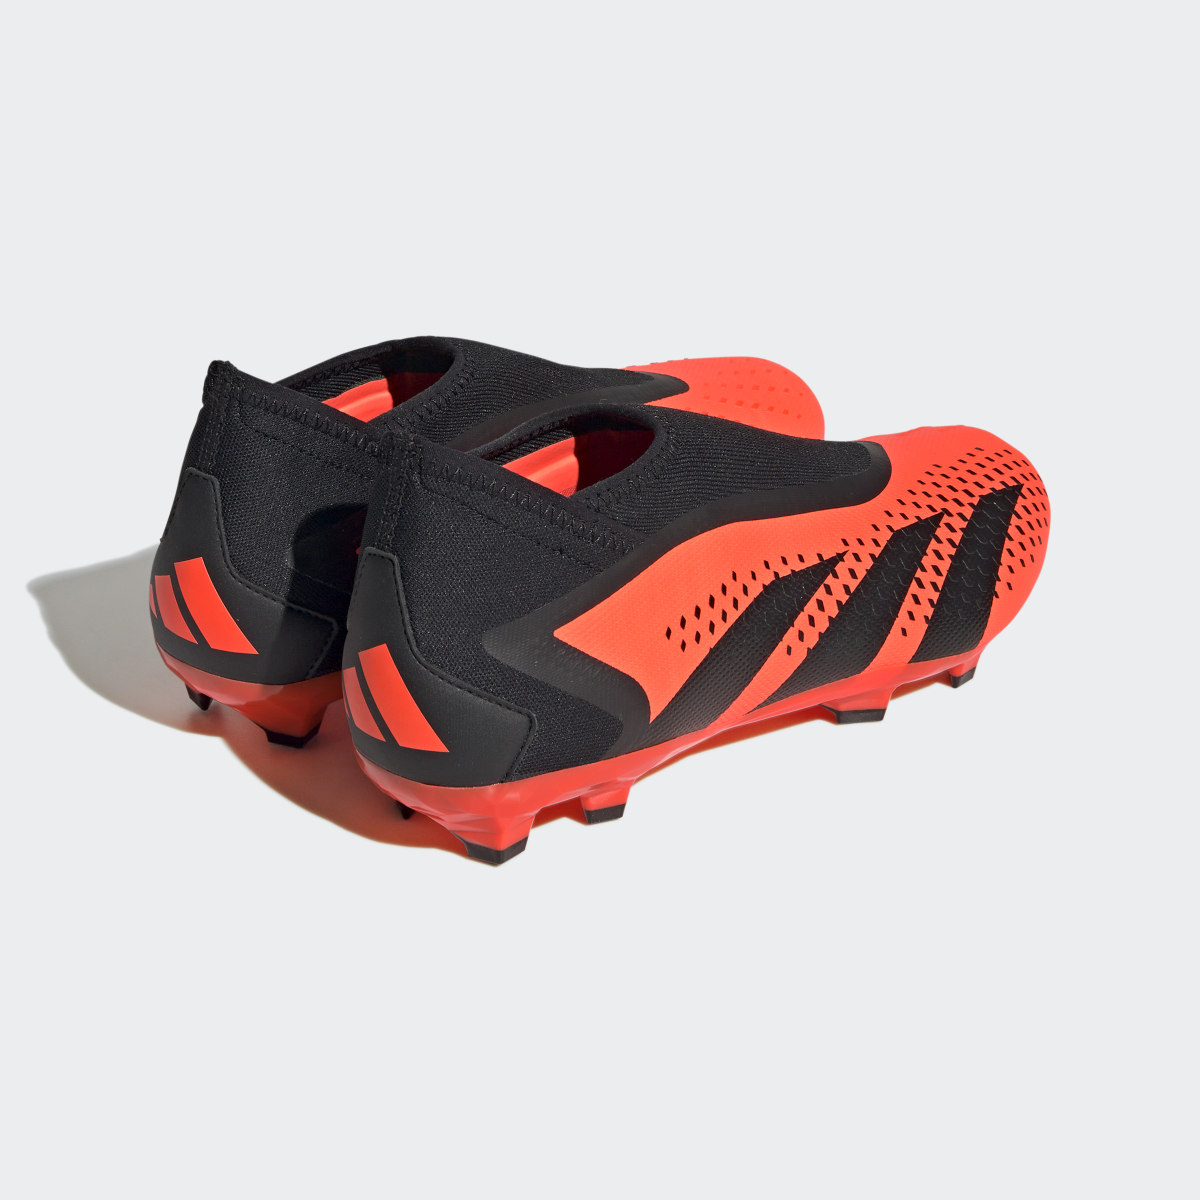 Adidas Predator Accuracy.3 Laceless Firm Ground Boots. 6